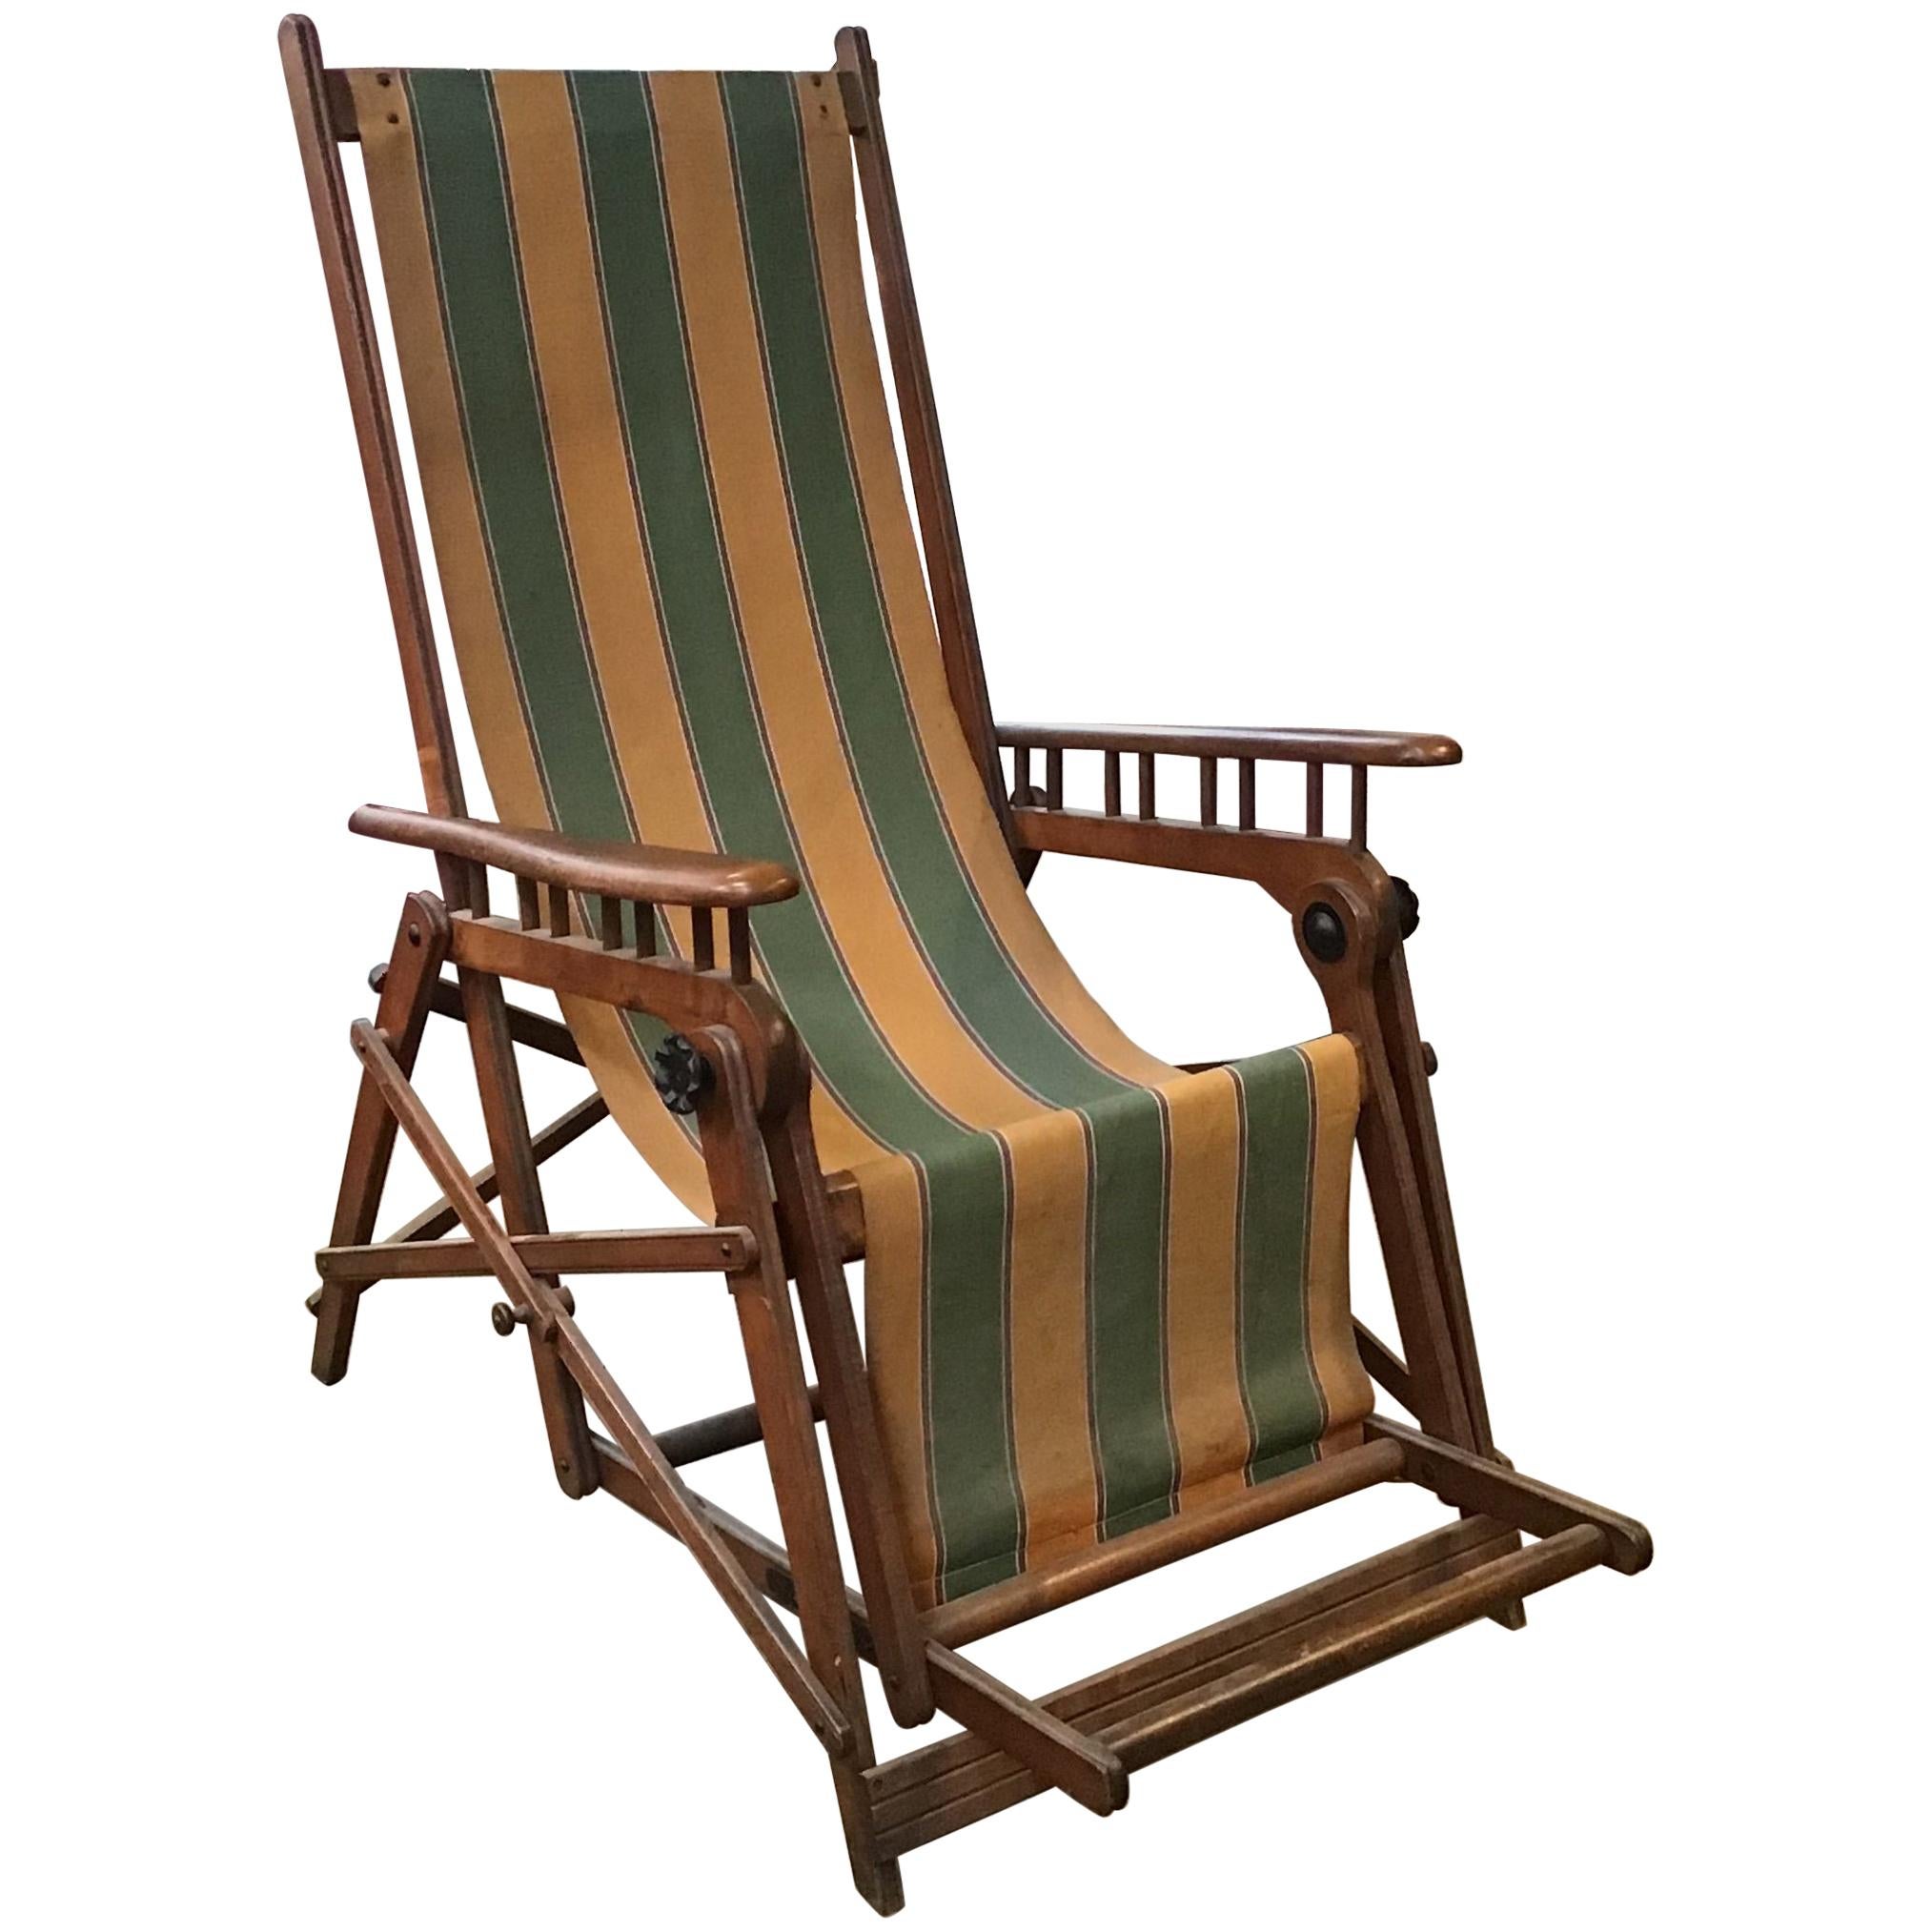 Italian Midcentury Adjustable and Foldable Beach Chair in Walnut from 1960s For Sale